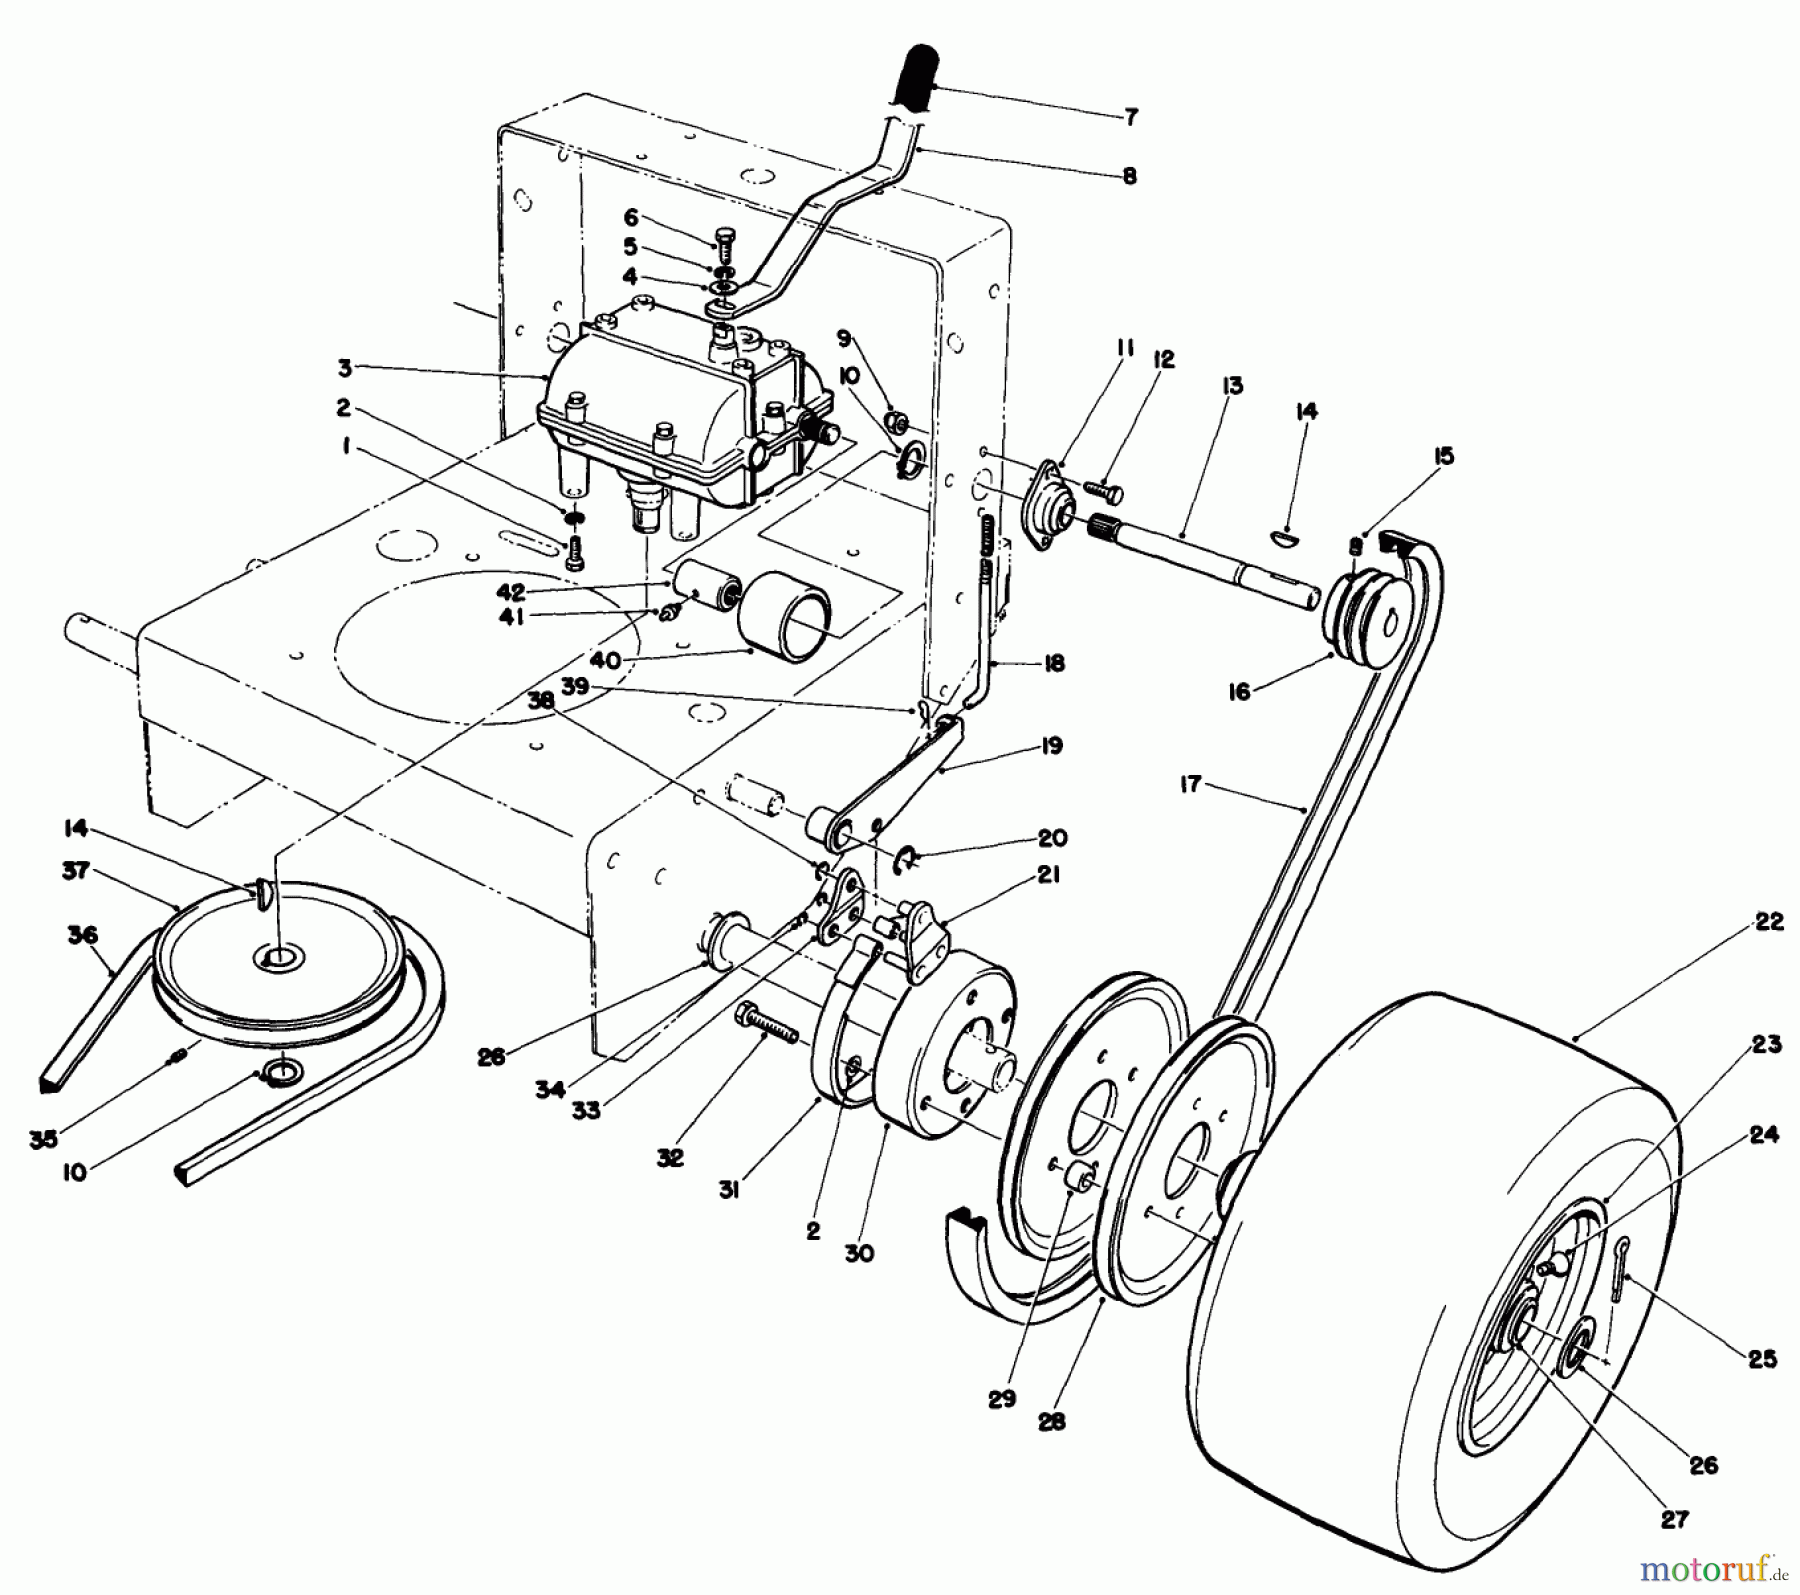  Toro Neu Mowers, Drive Unit Only 30116 - Toro Mid-Size Proline Gear Traction Unit, 16 hp, 1986 (6000001-6999999) AXLE ASSEMBLY